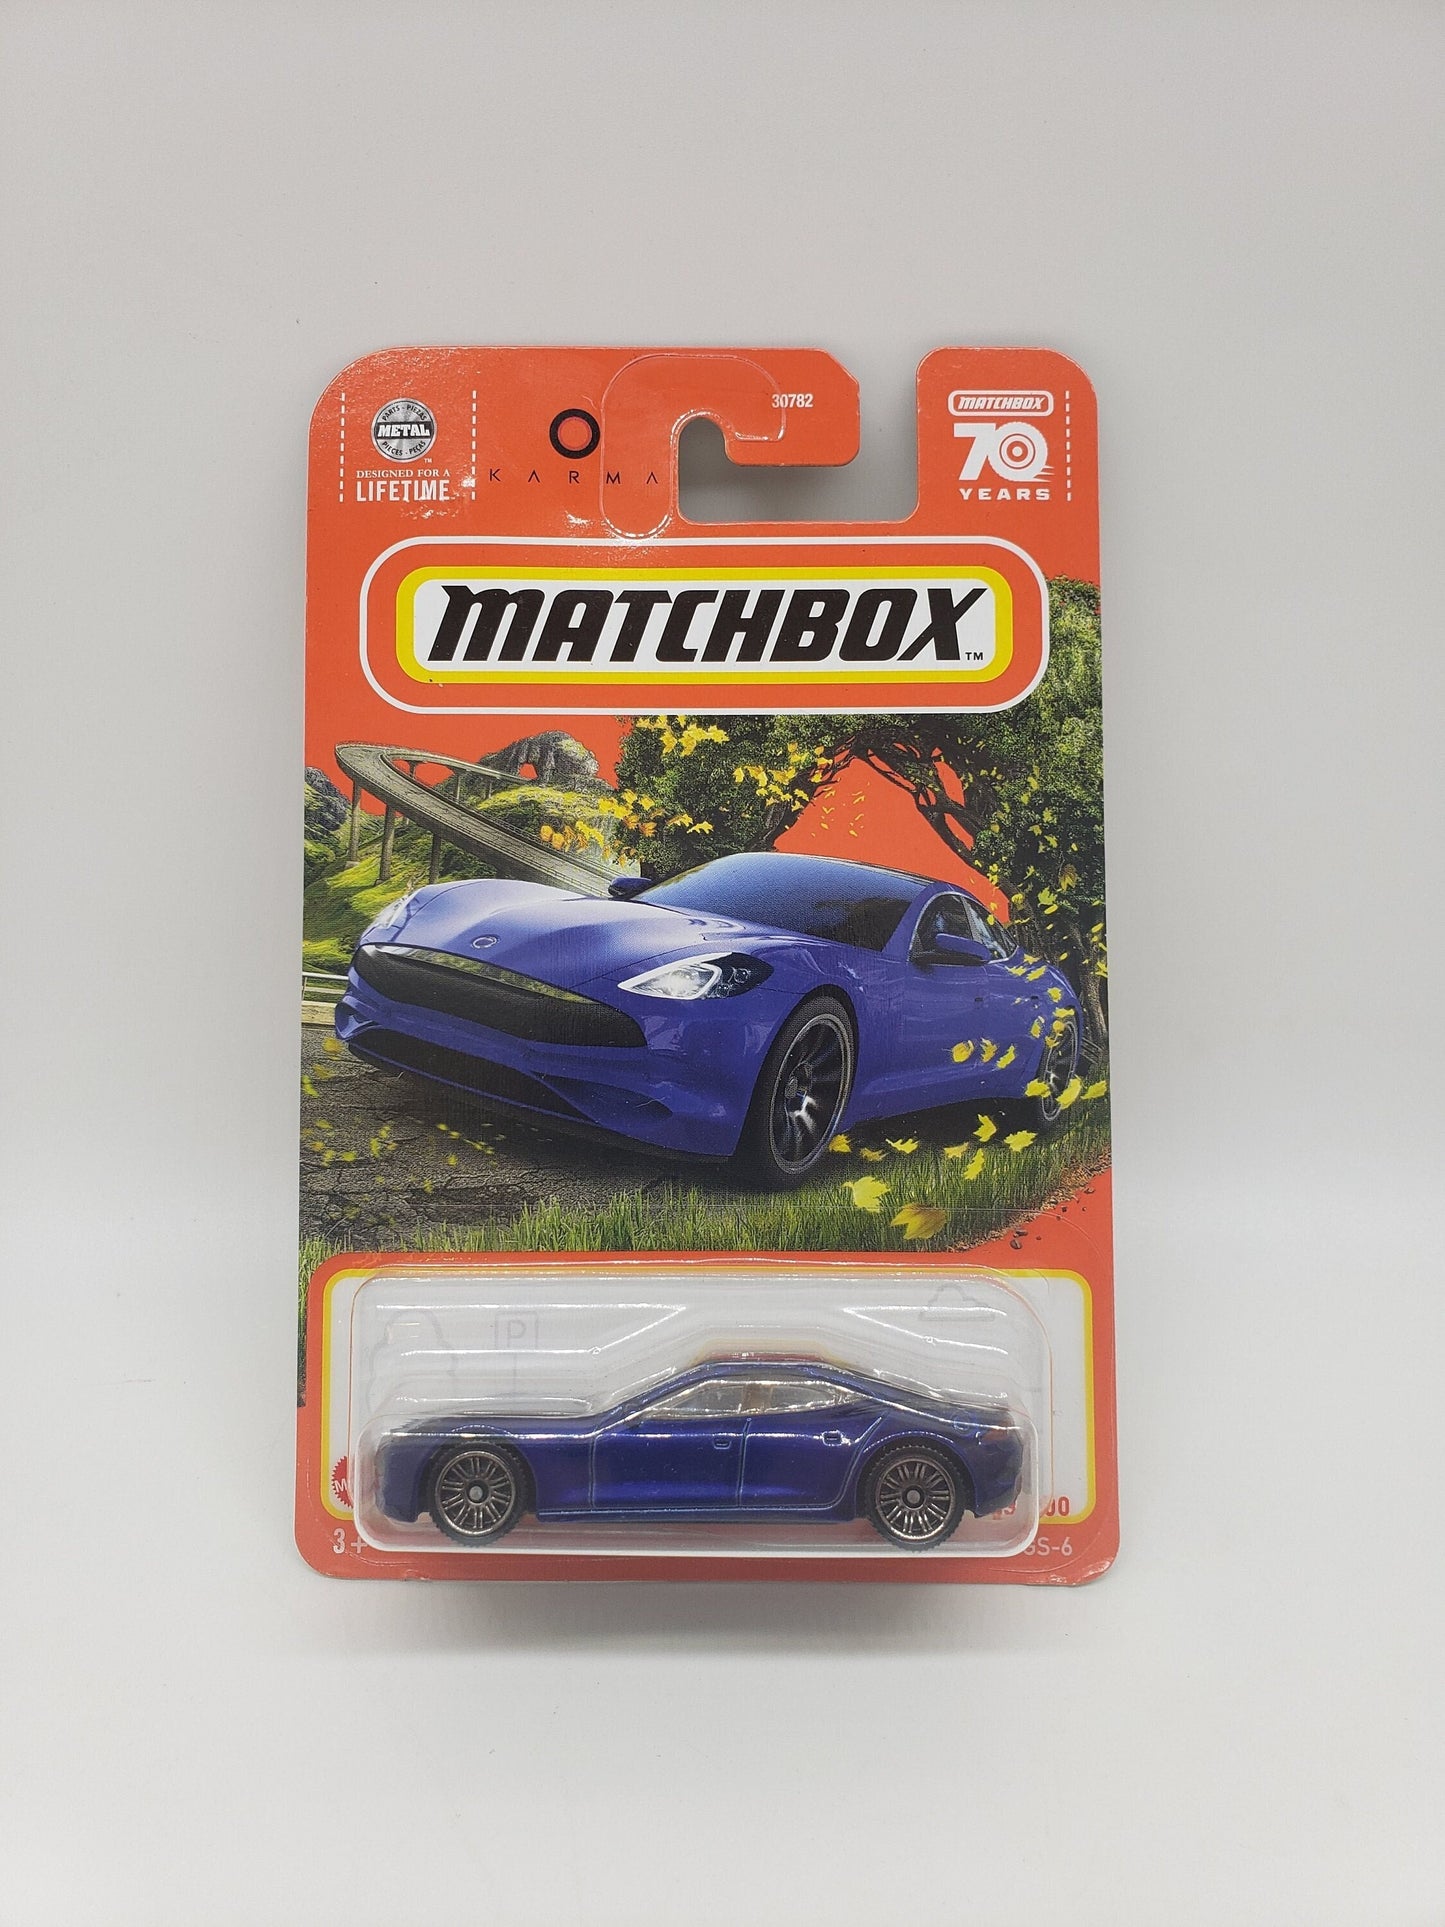 Matchbox Karma GS-6 Blue Collectable Scale Model Miniature Toy Car Perfect Birthday Gift